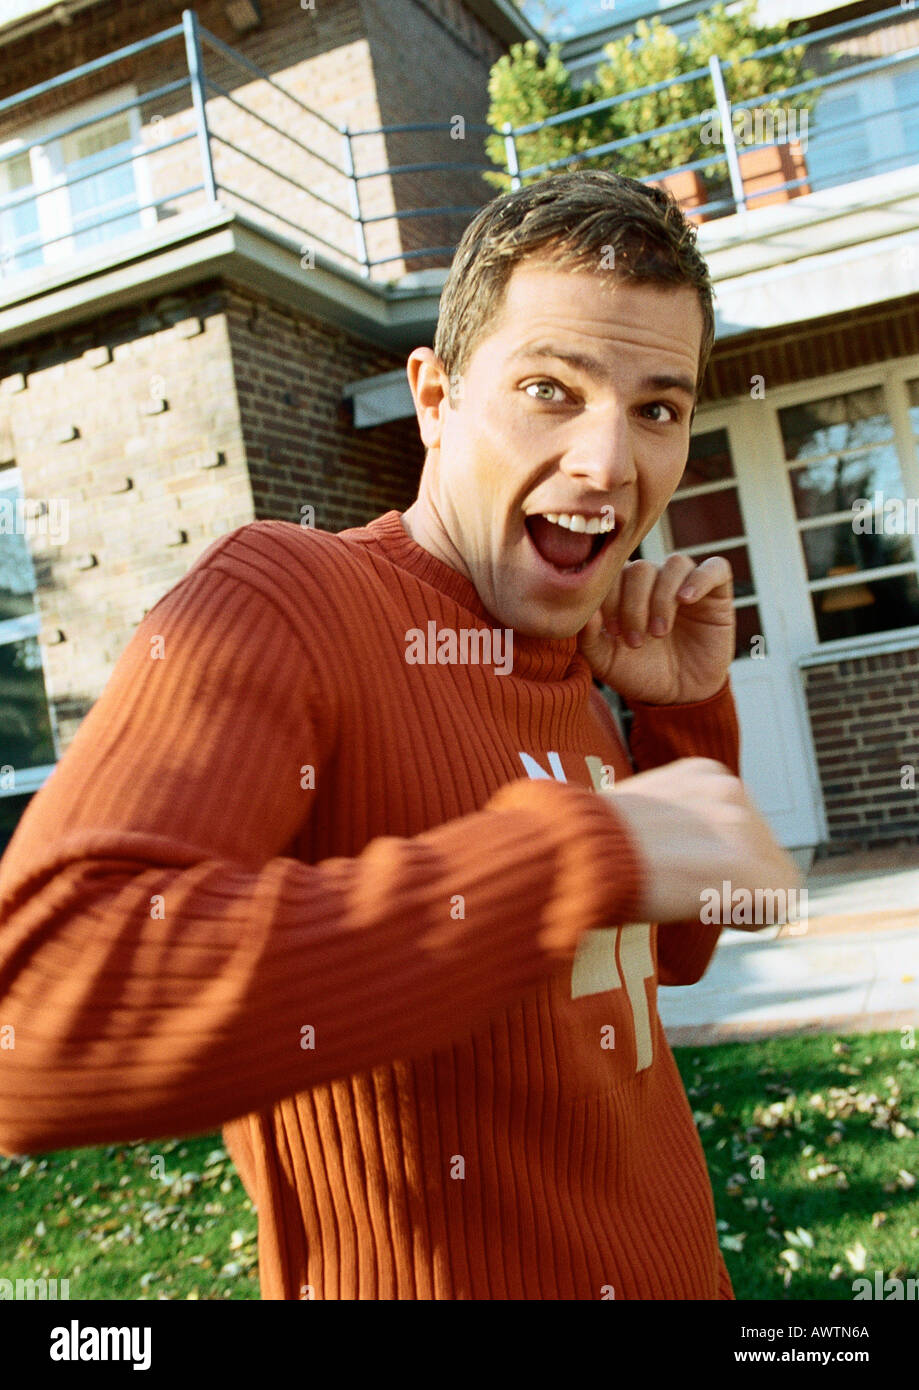 Man standing in front of house, looking surprised Stock Photo